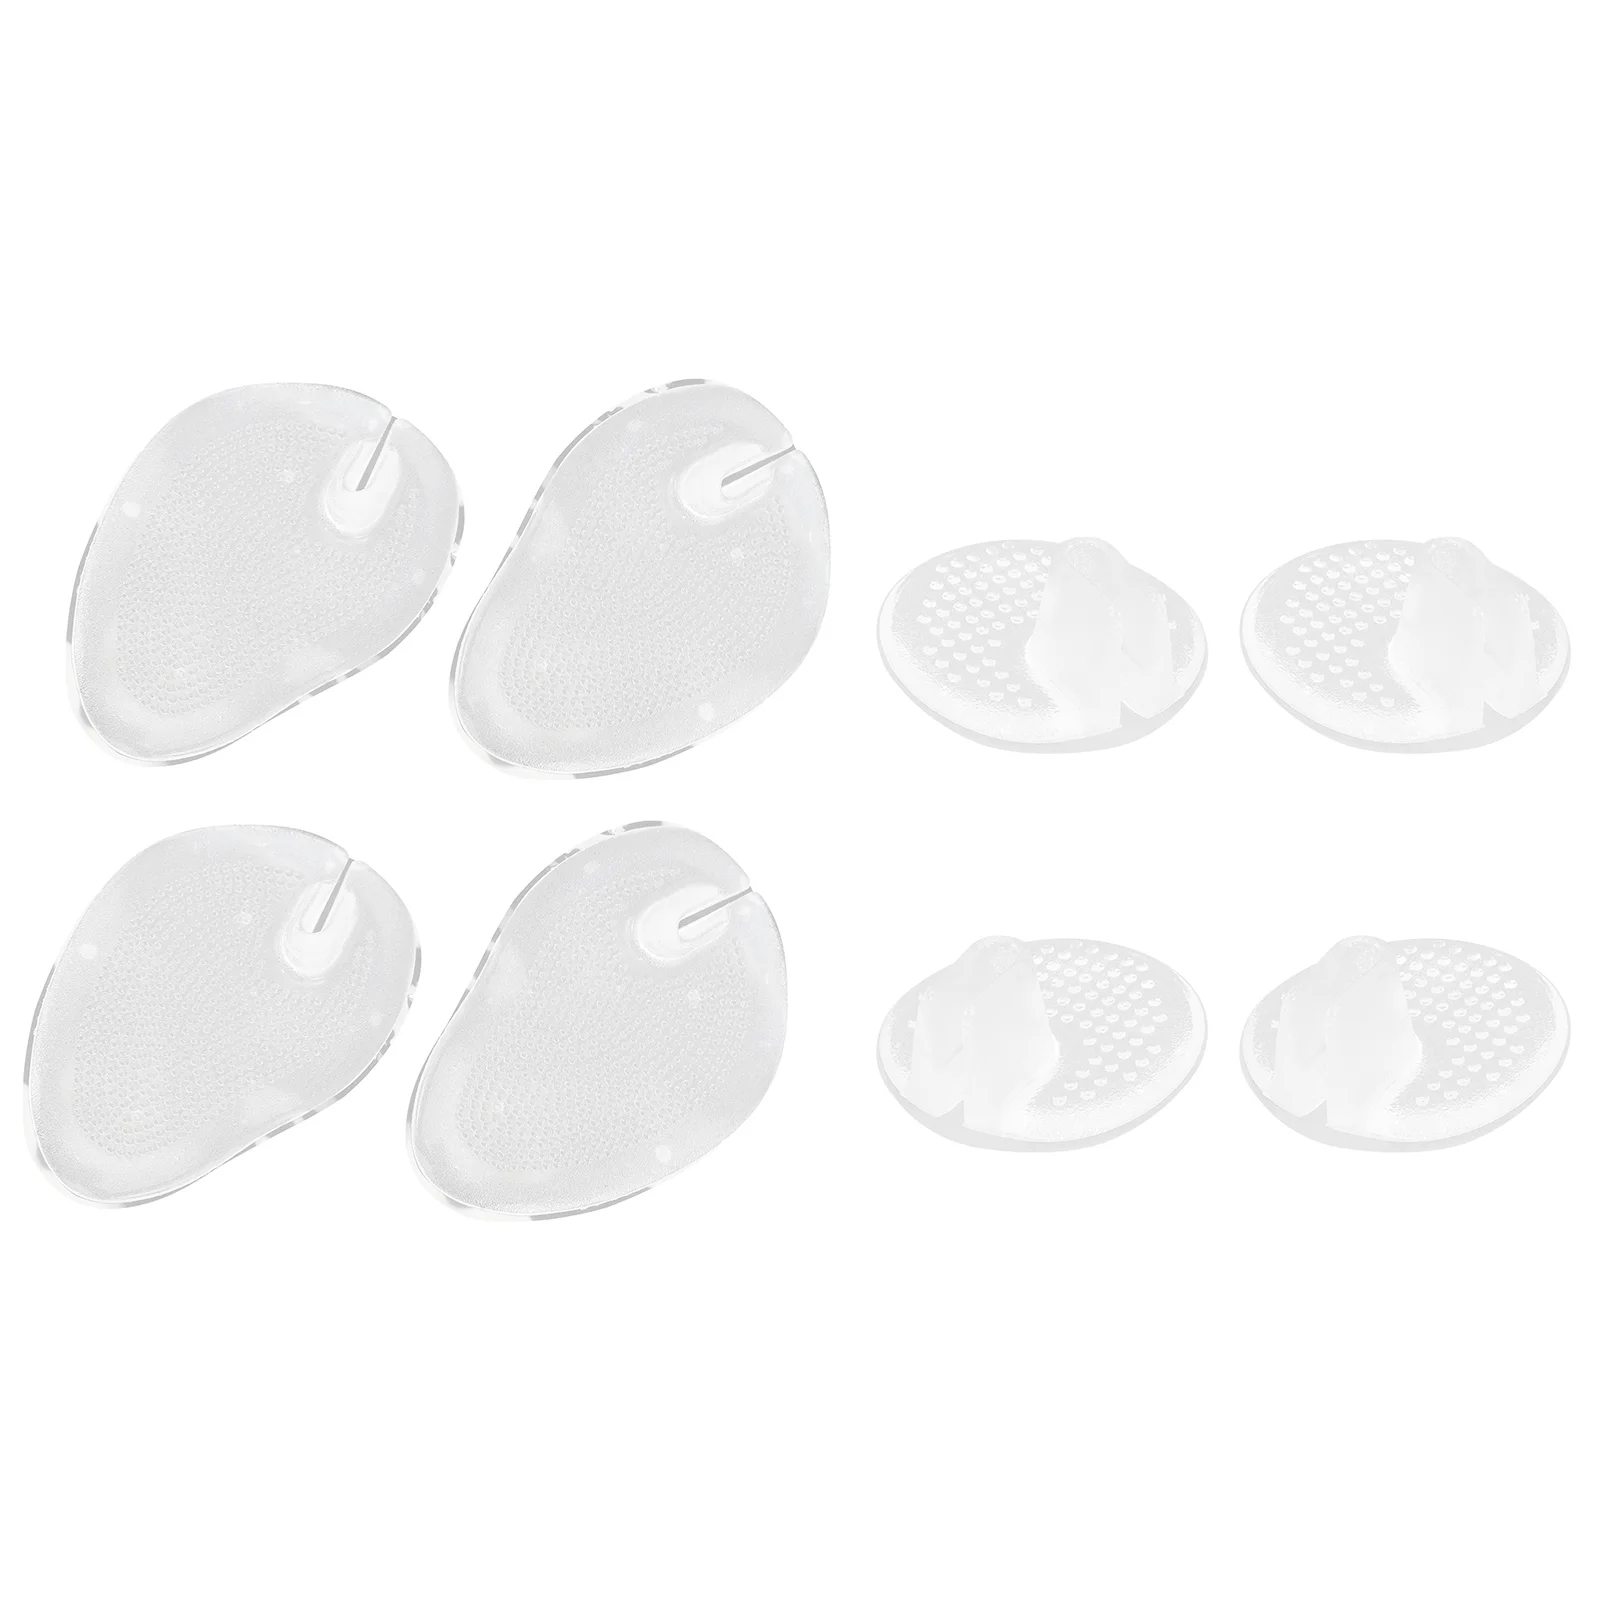 4 Pairs Thong Sandal Clear Thong Sandal Thong Sandal Toe Pads Silicone Forefoot Cushions Clear Toe Grip Pads